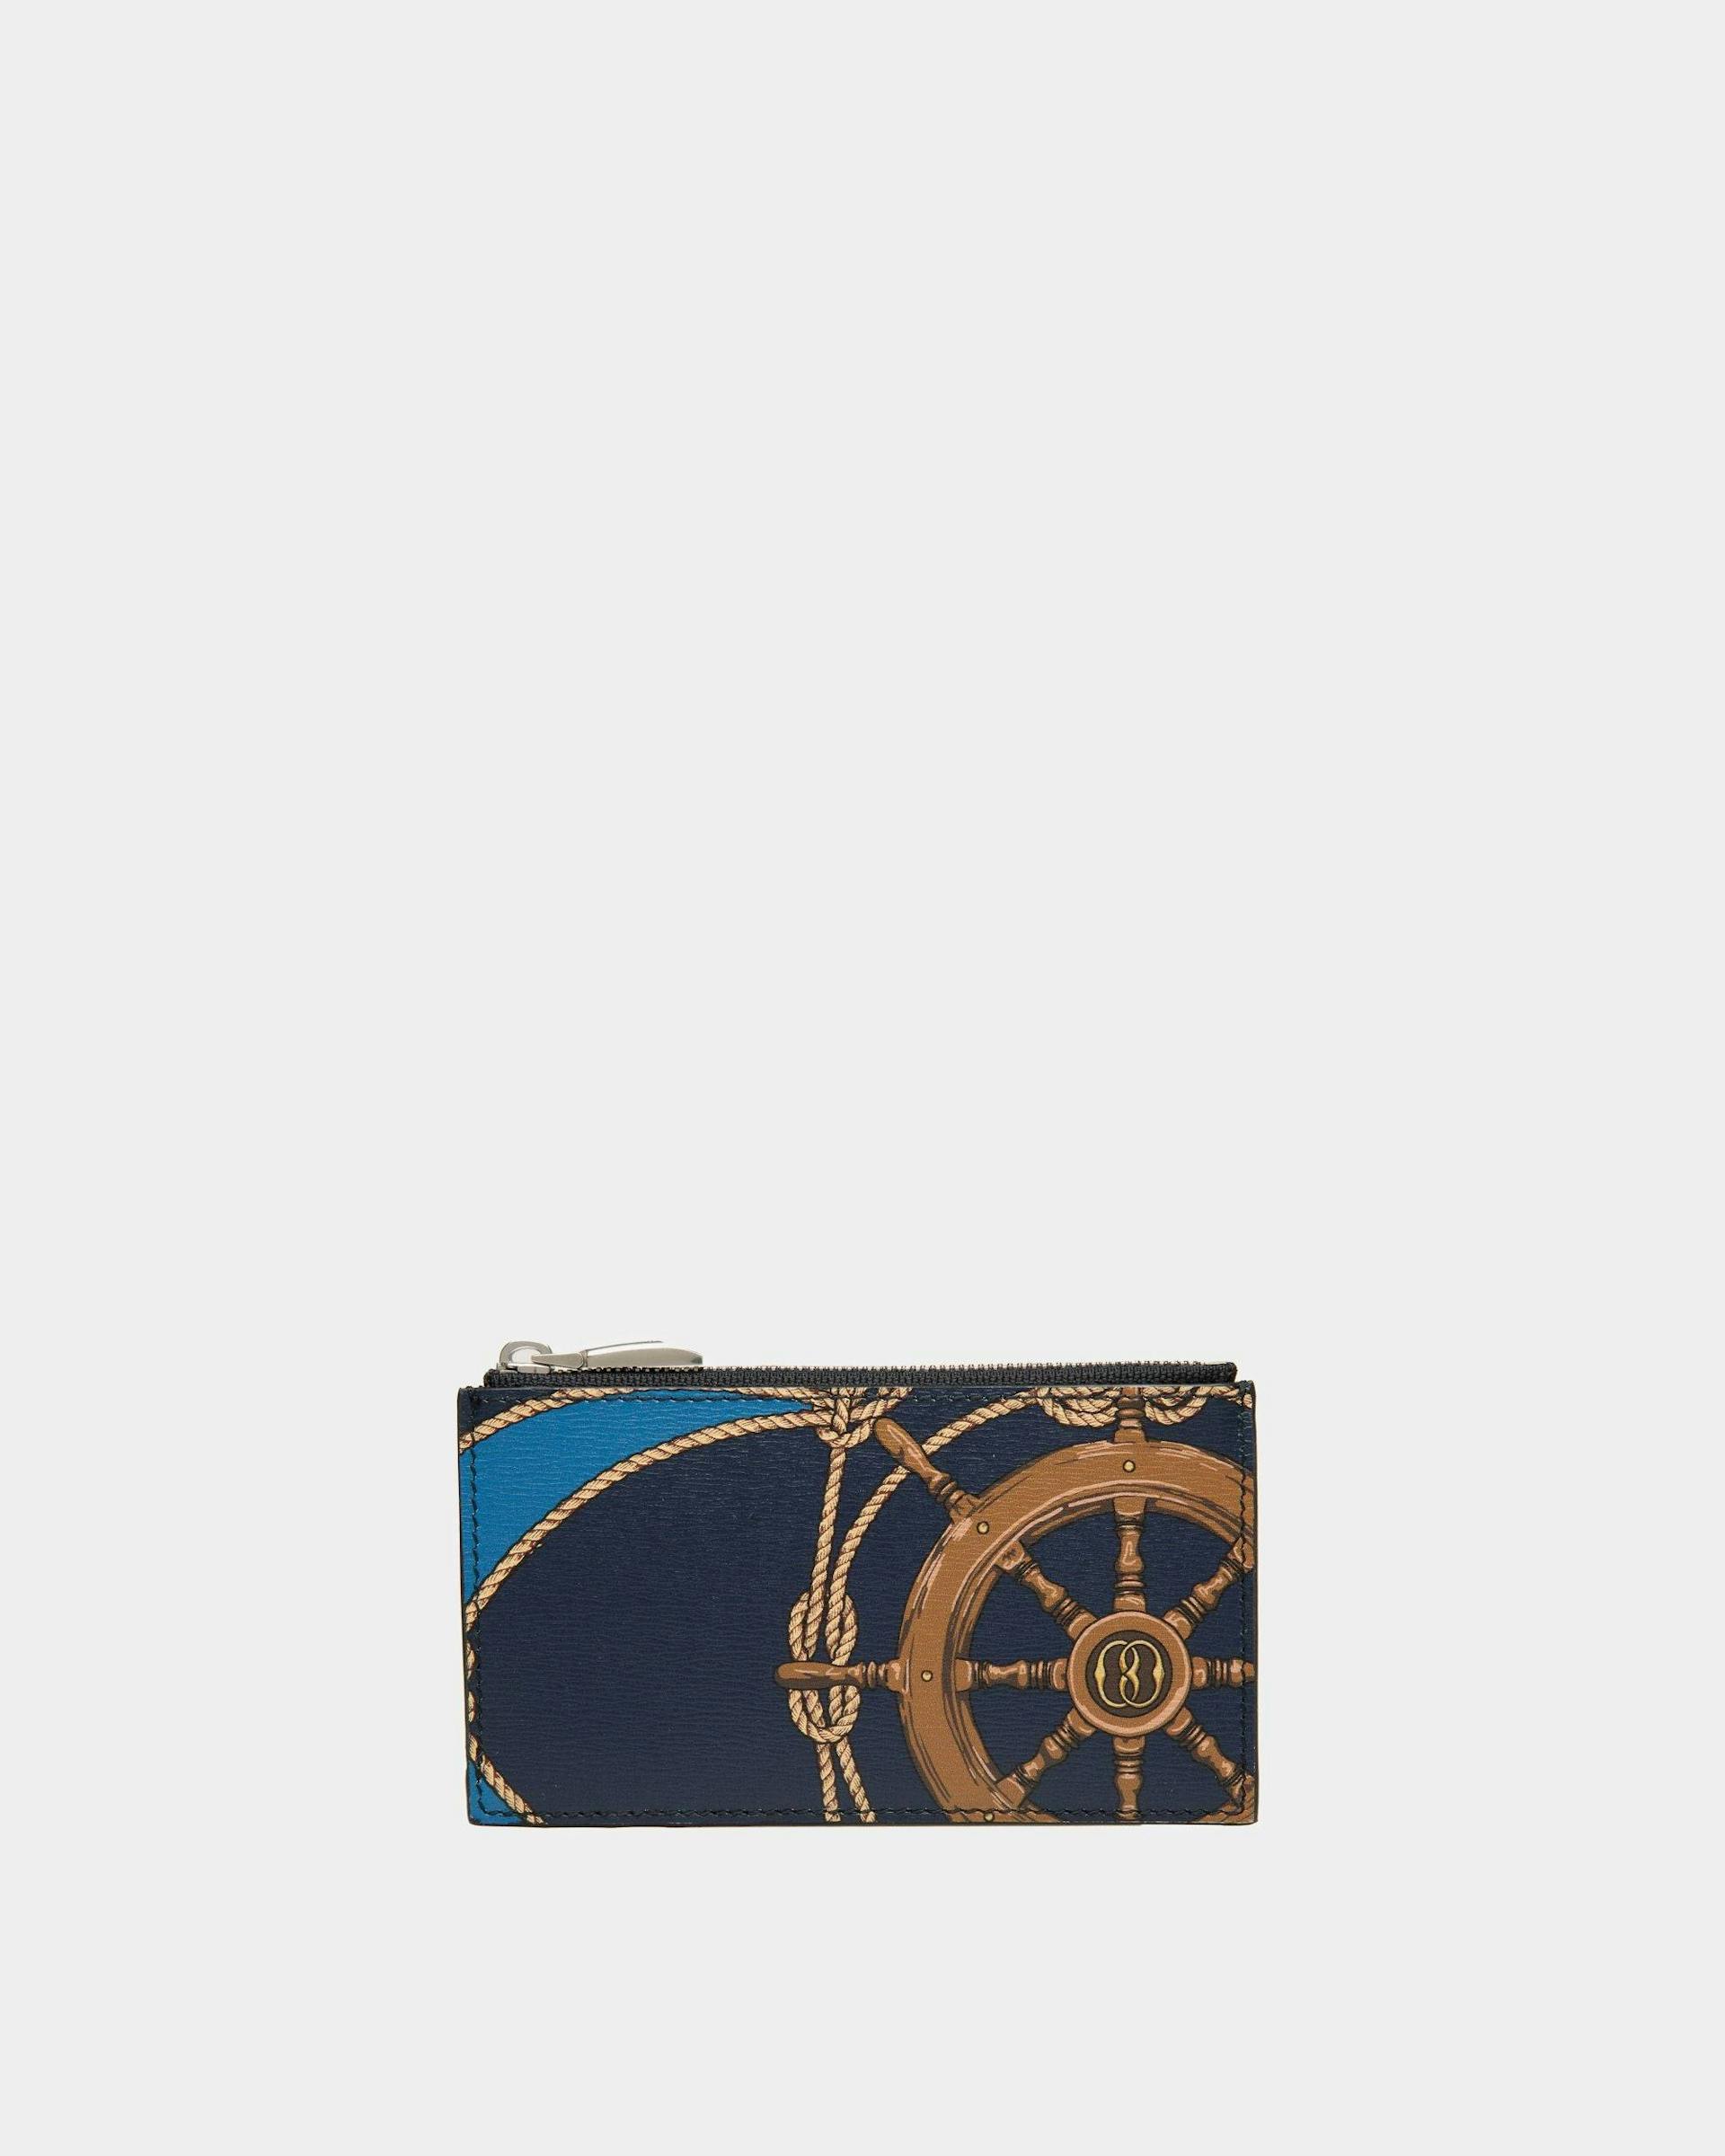 Men's Crossing Coin & Card Holder in Blue Leather | Bally | Still Life Front